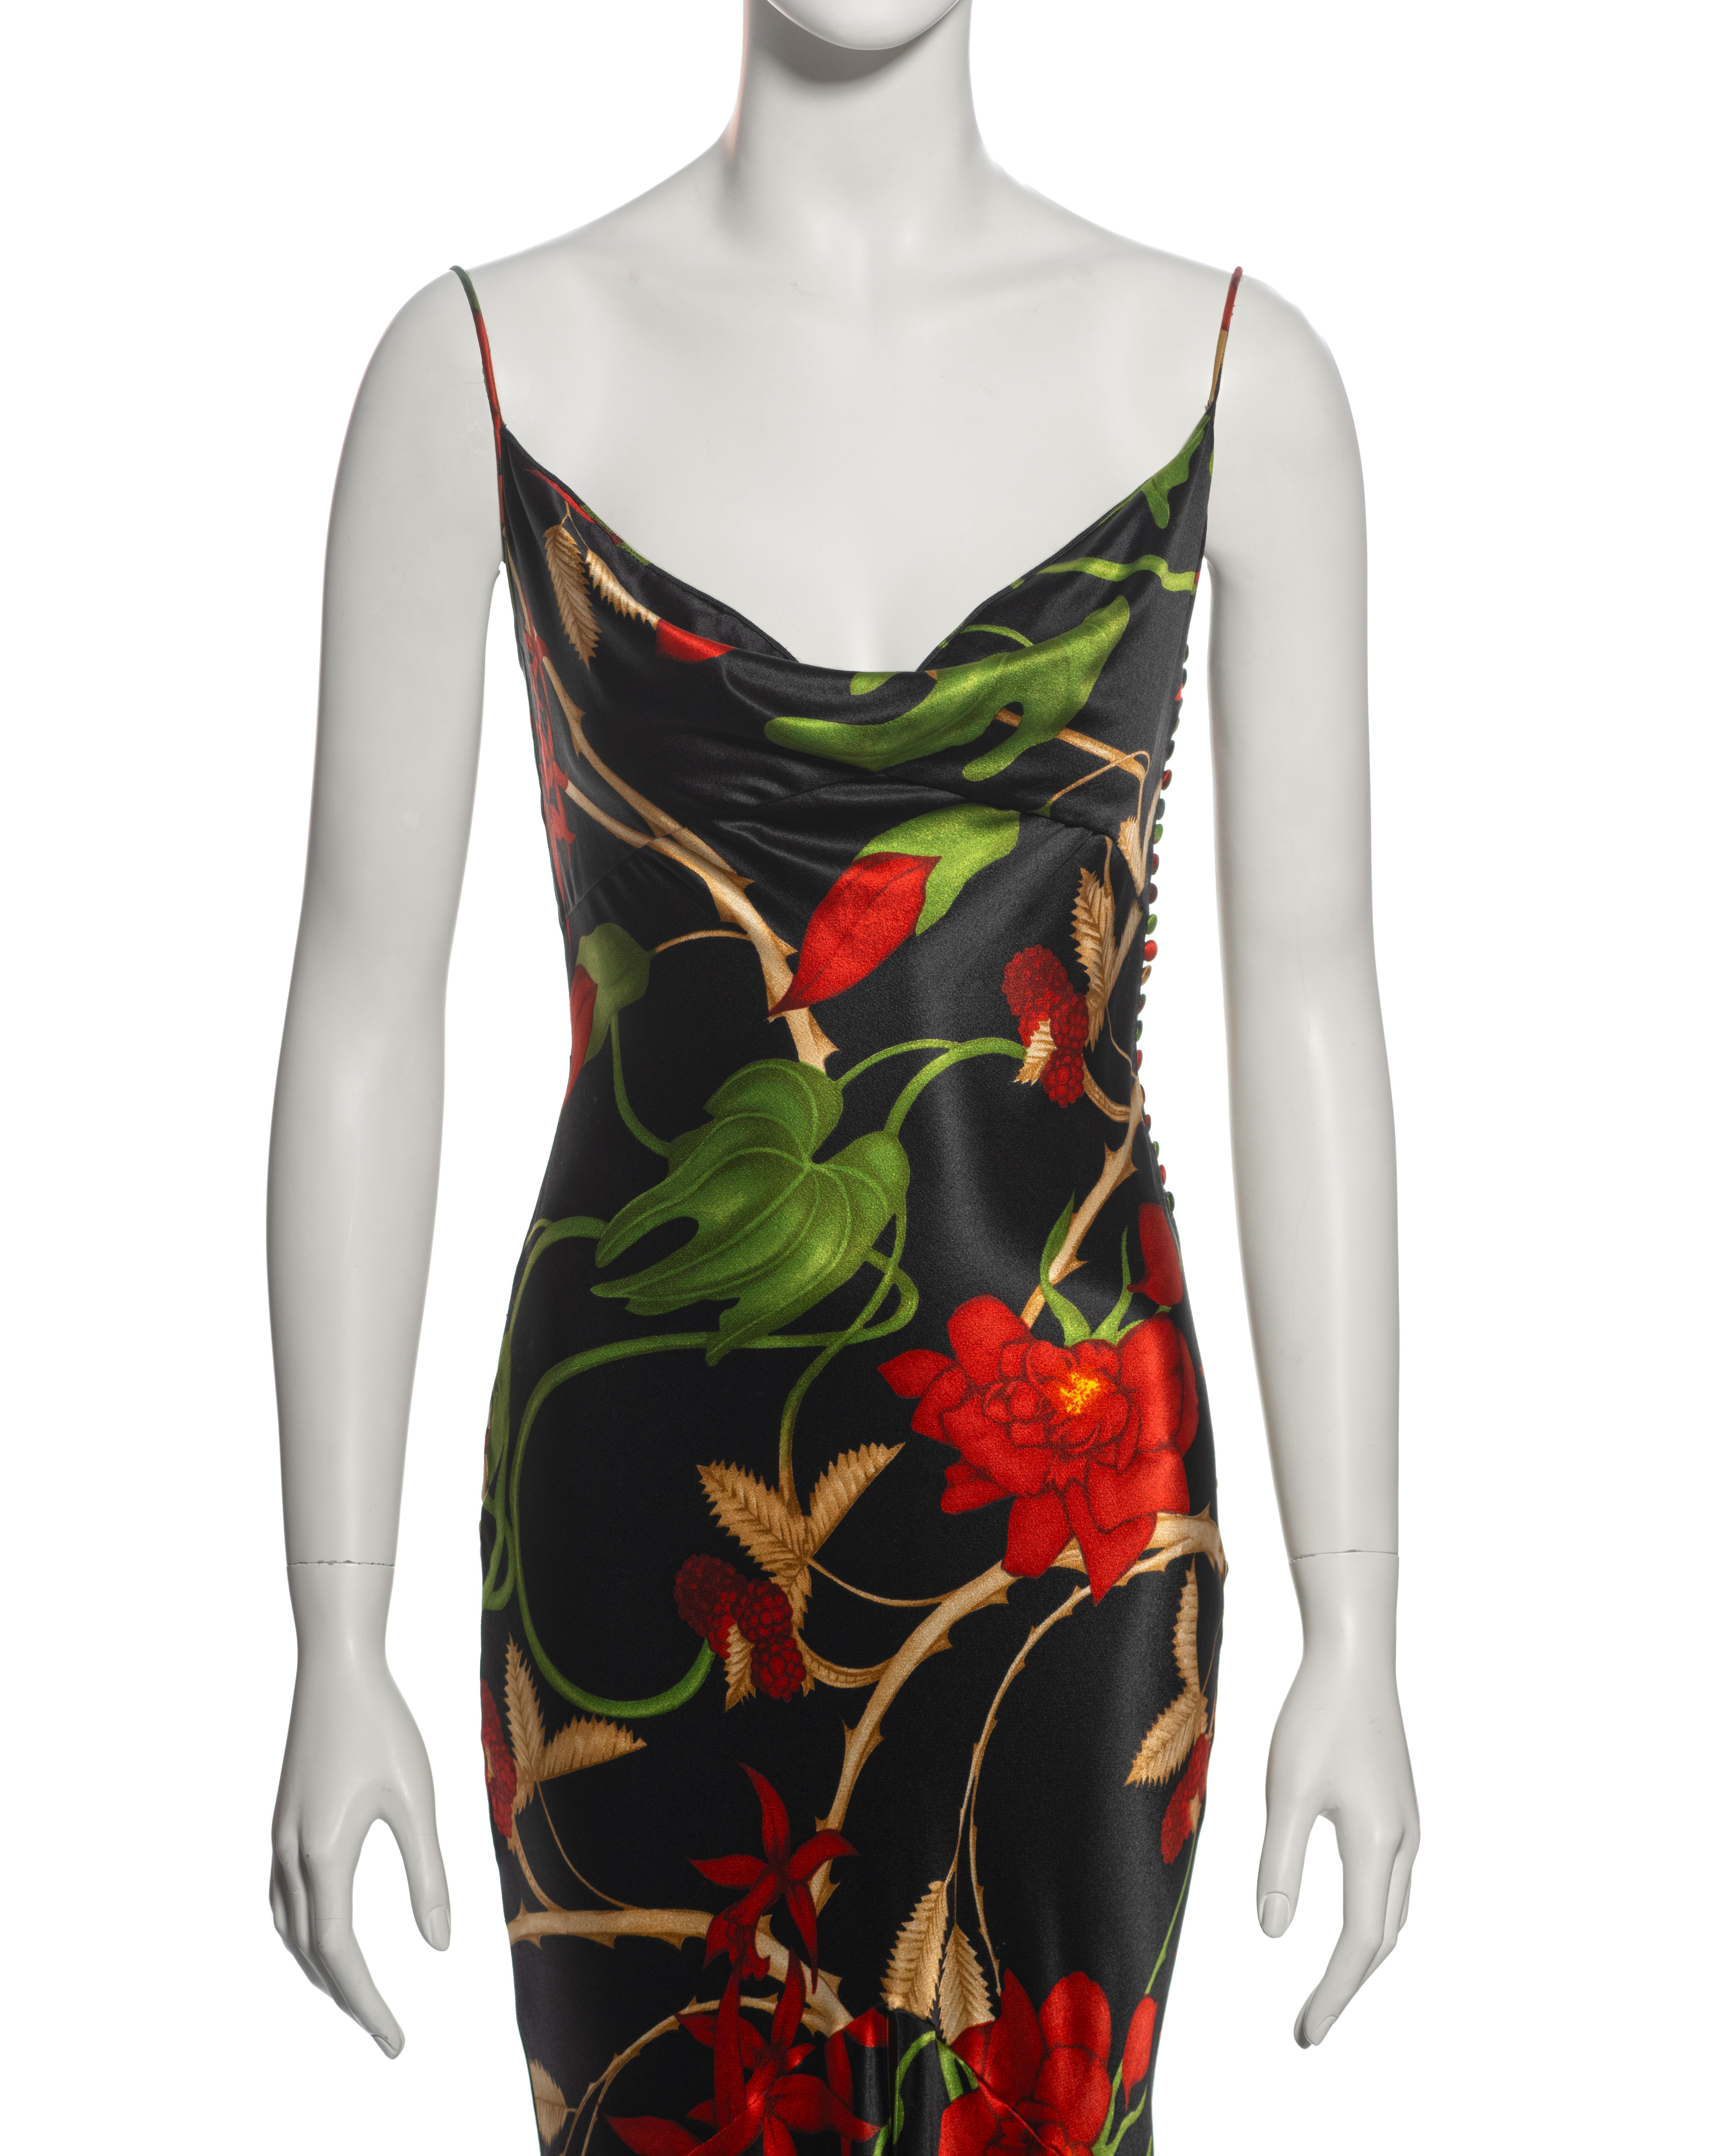 Christian Dior by John Galliano Floral Bias Cut Silk Evening Dress, fw 2002 In Excellent Condition For Sale In London, GB